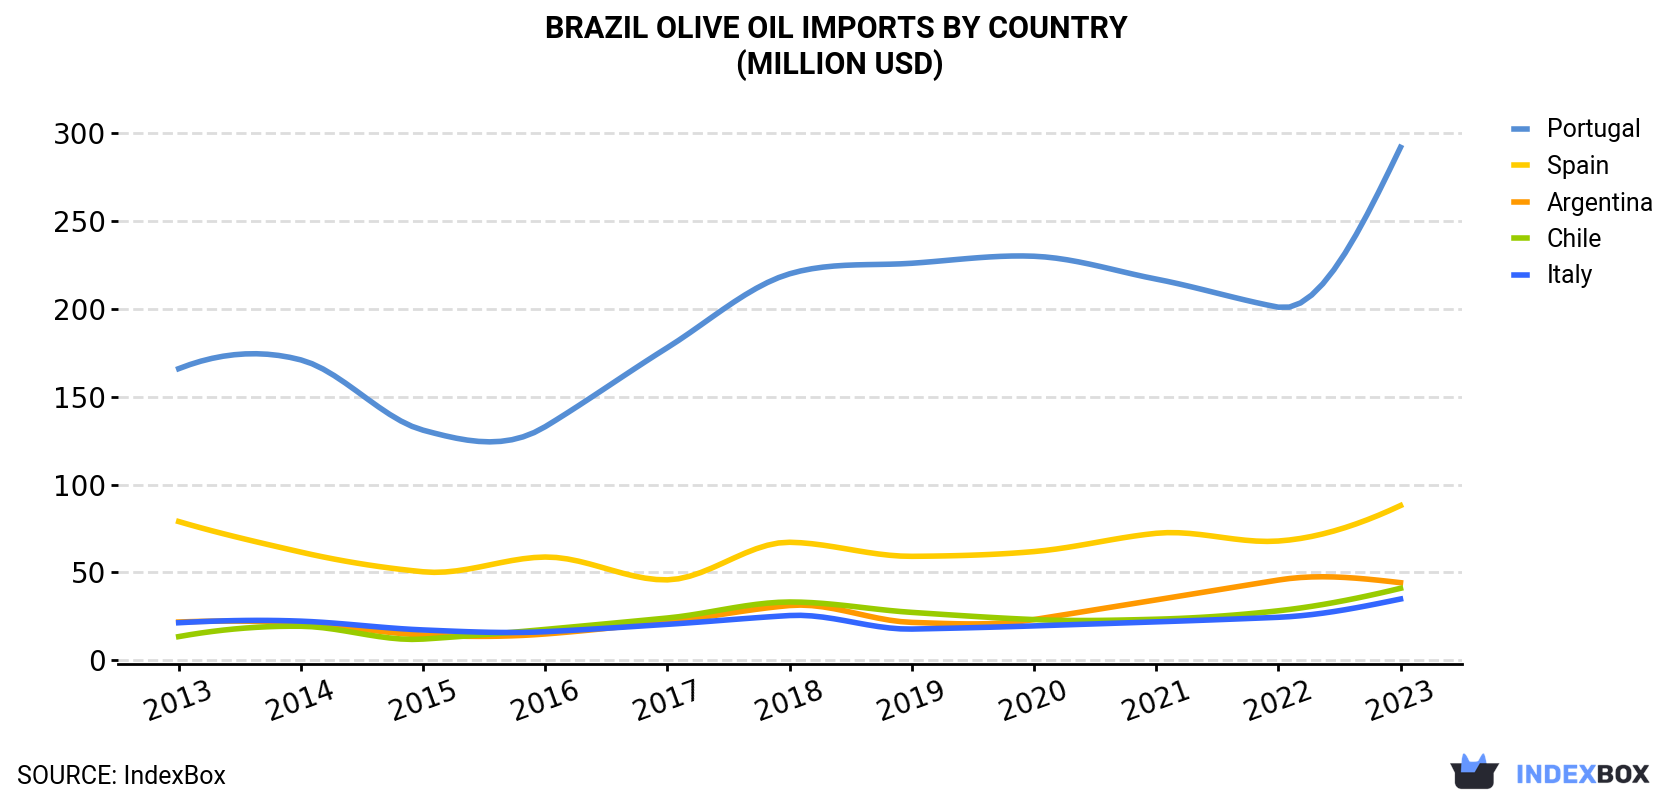 Brazil Olive Oil Imports By Country (Million USD)